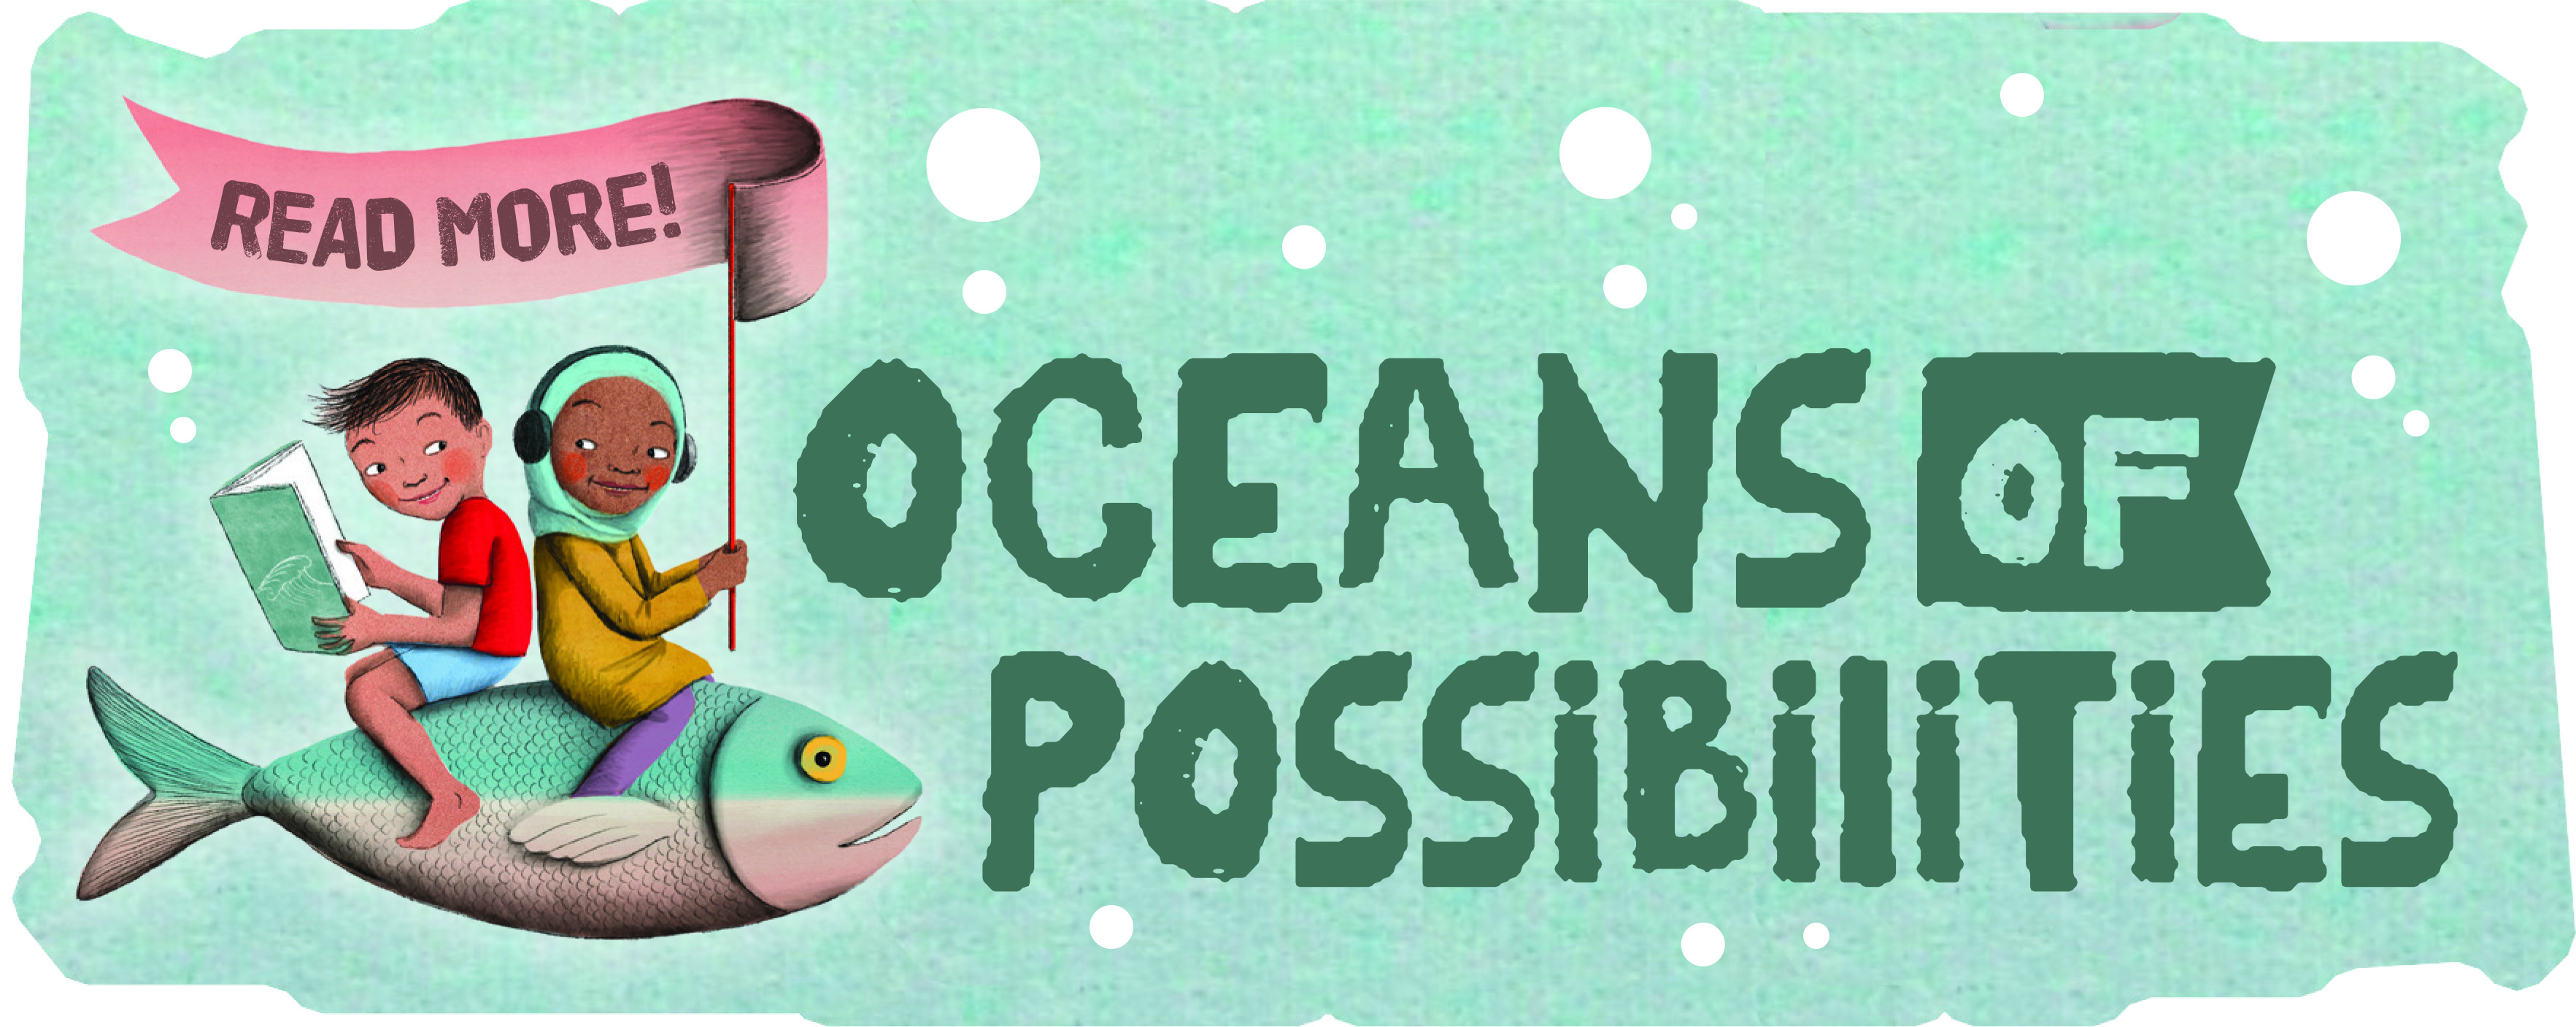 CSLP slogan saying oceans of possibilities, with a boy and girl riding a fish